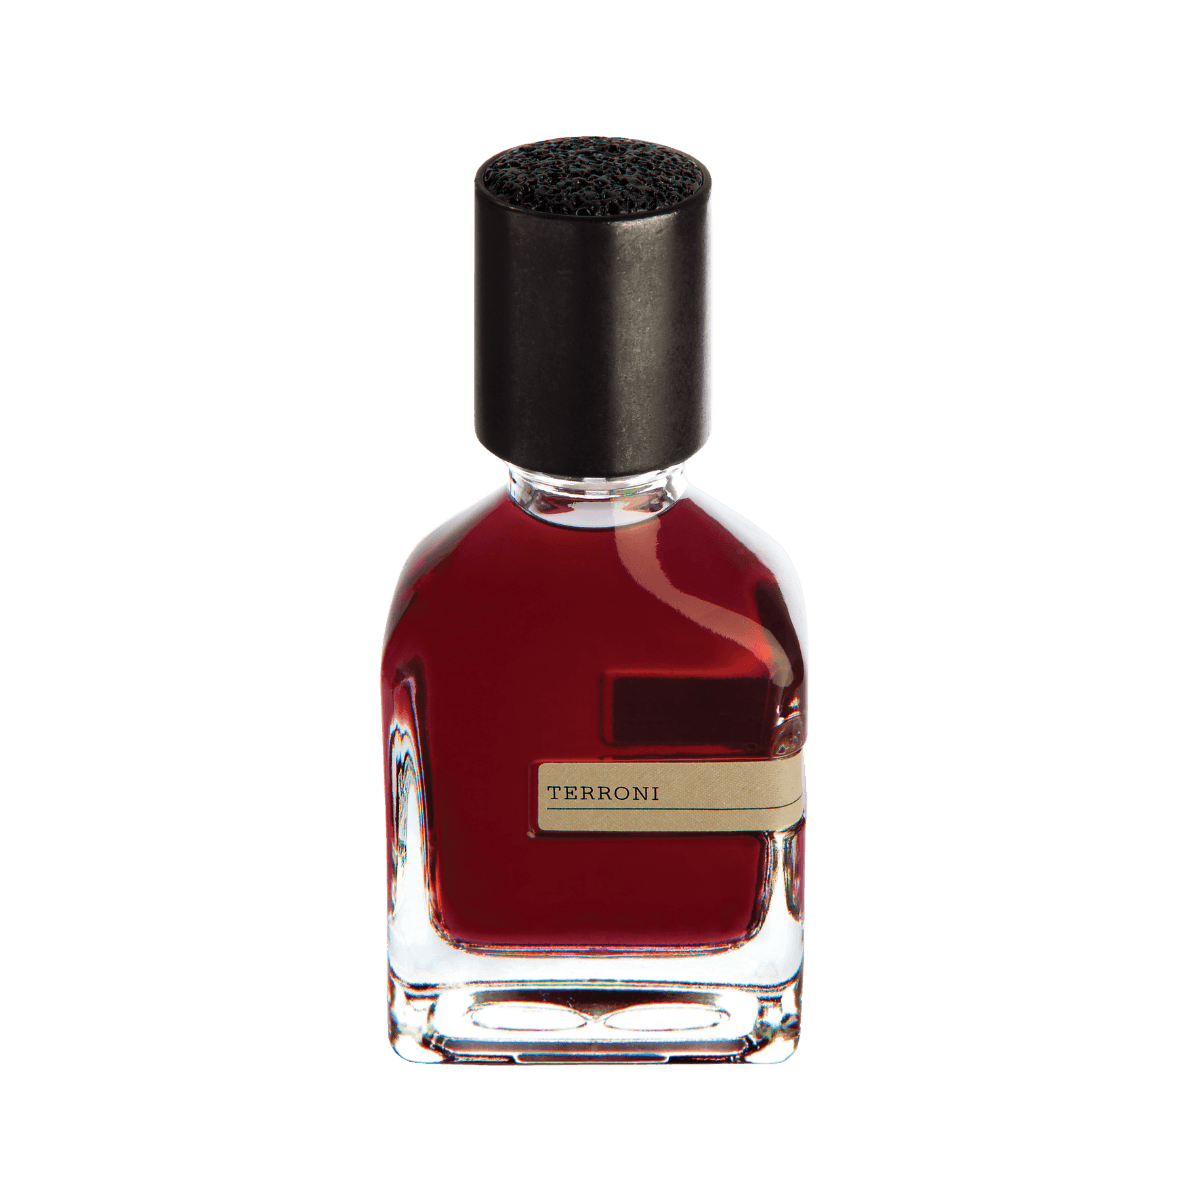 Instablog9ja on X: From @ScentHQ : Ombré Nomade is everything you hear it  is! A fantastic amber woody Frag that screams CLASS! 100ml, 540k (many  others from LV in stock!) On the